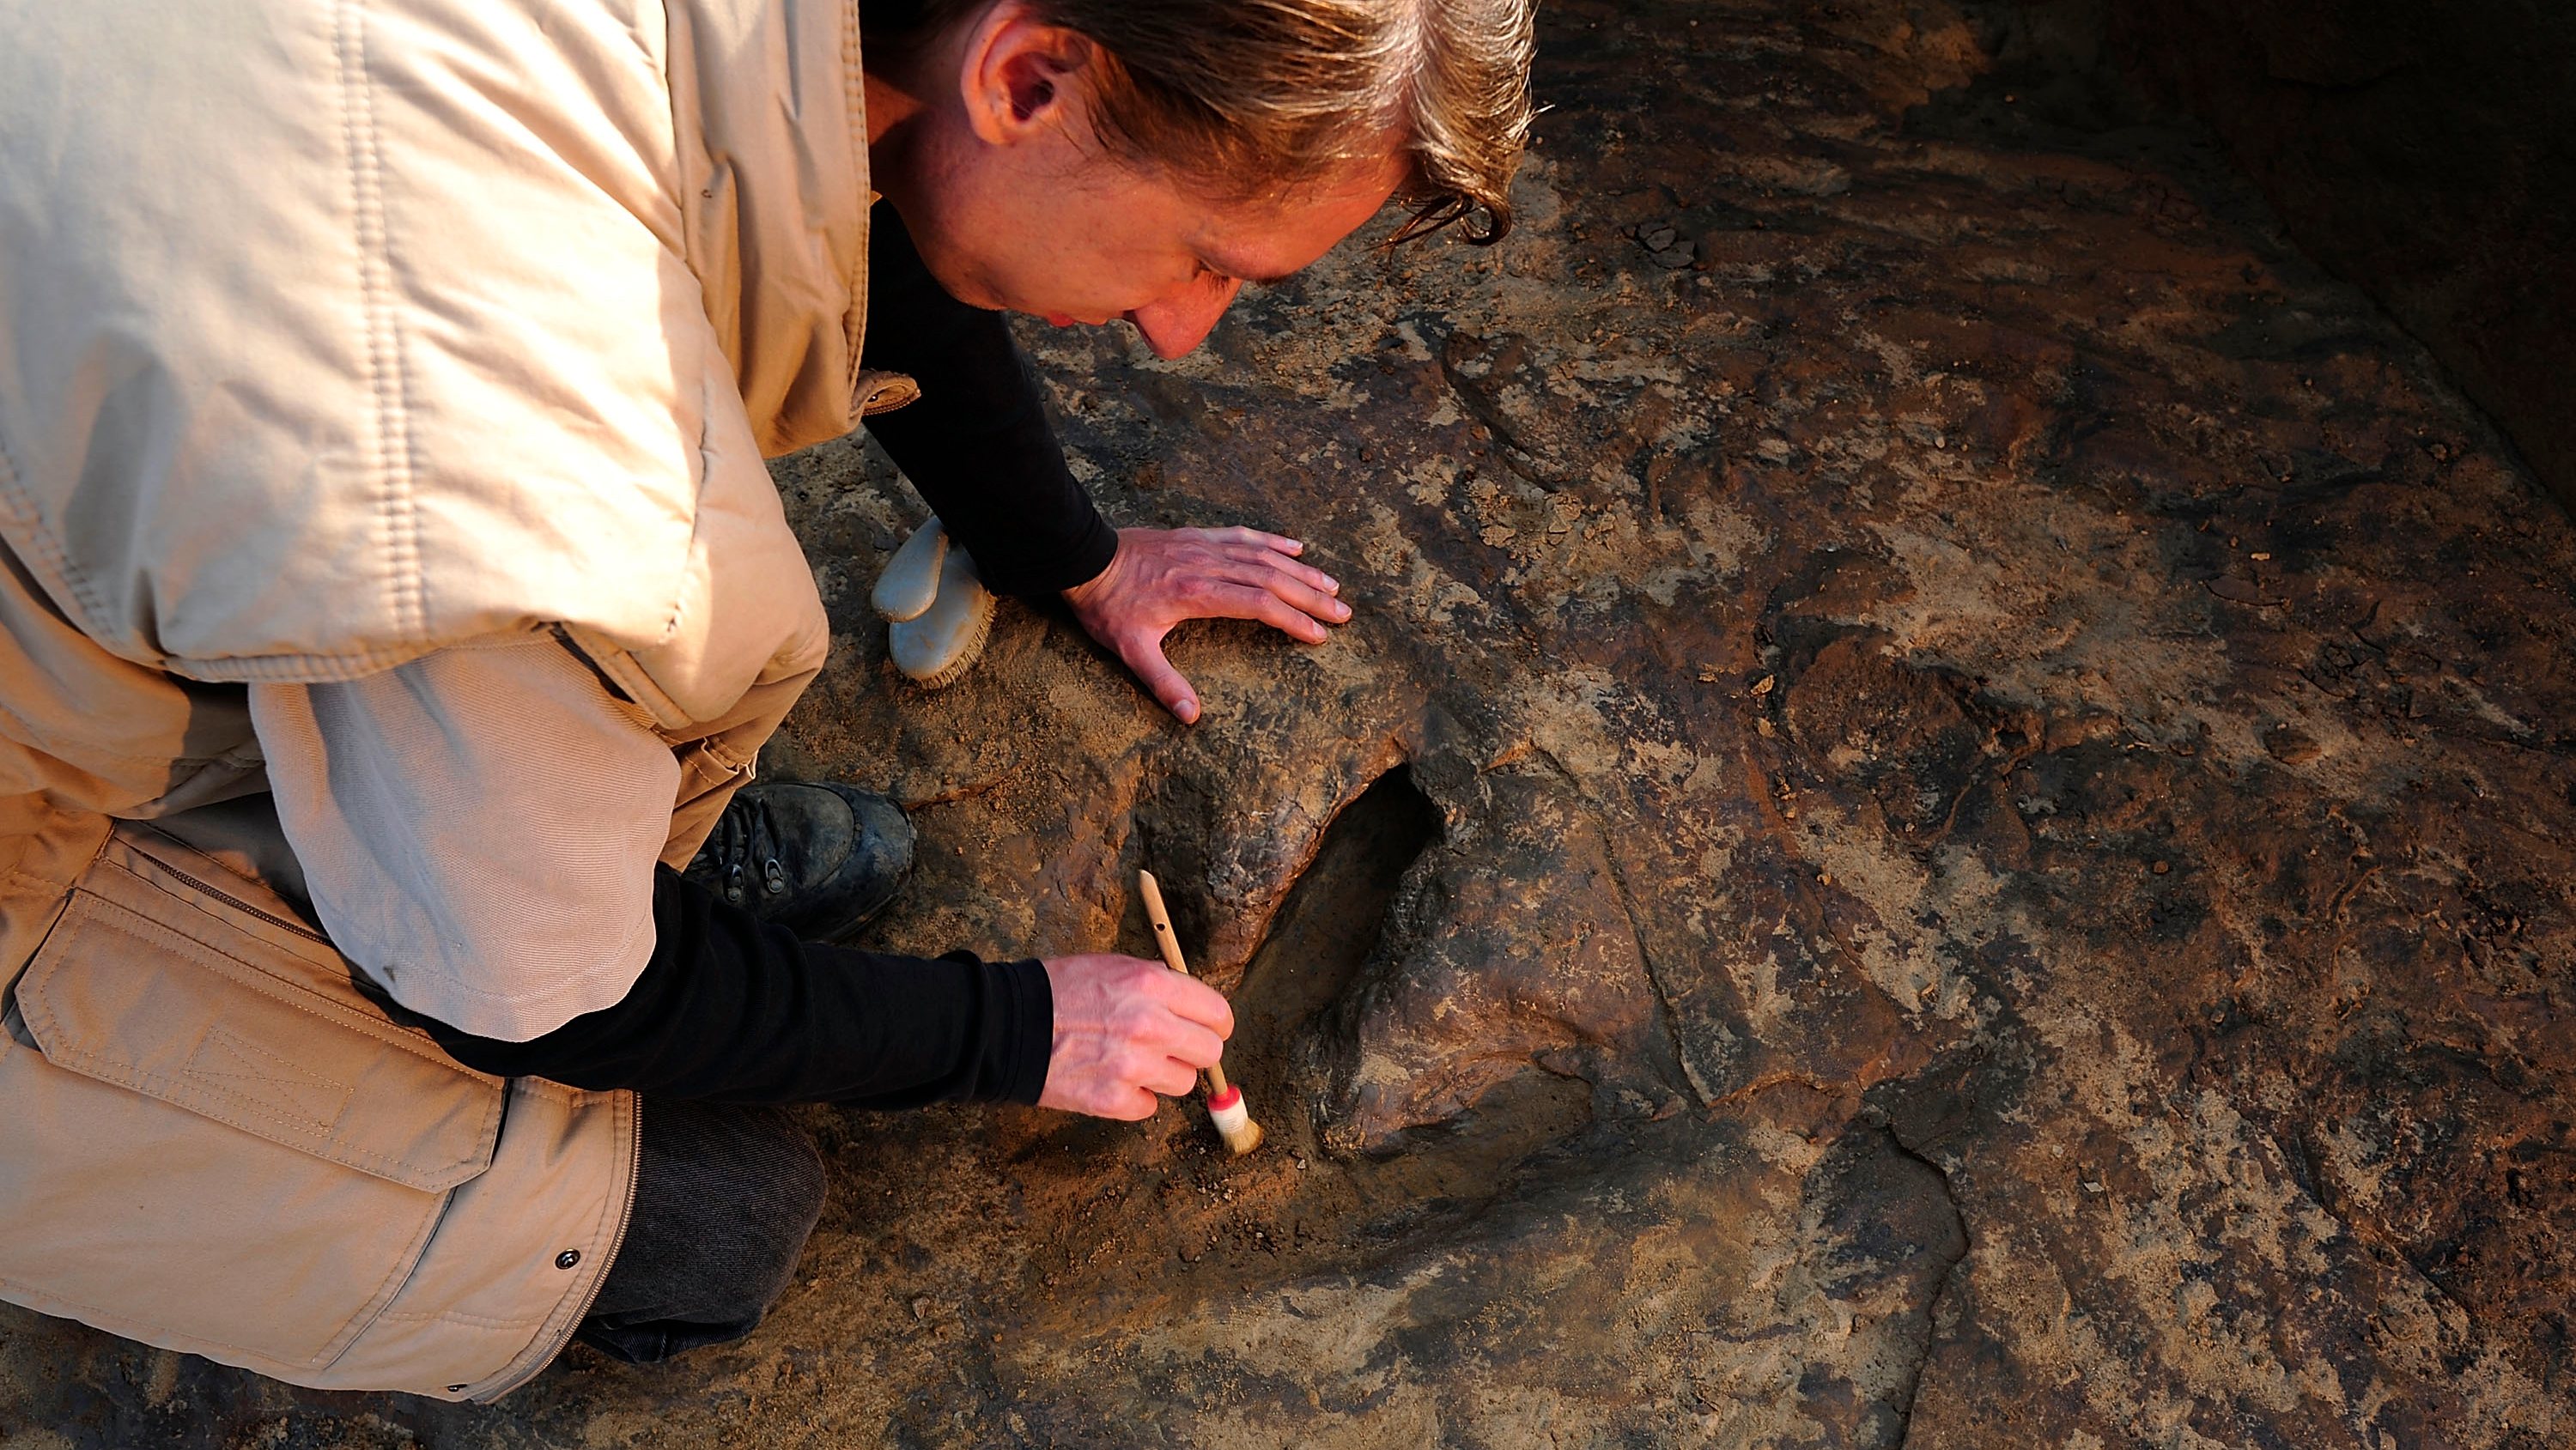 Archaeologists Discover 90 Dinosaur Footprints